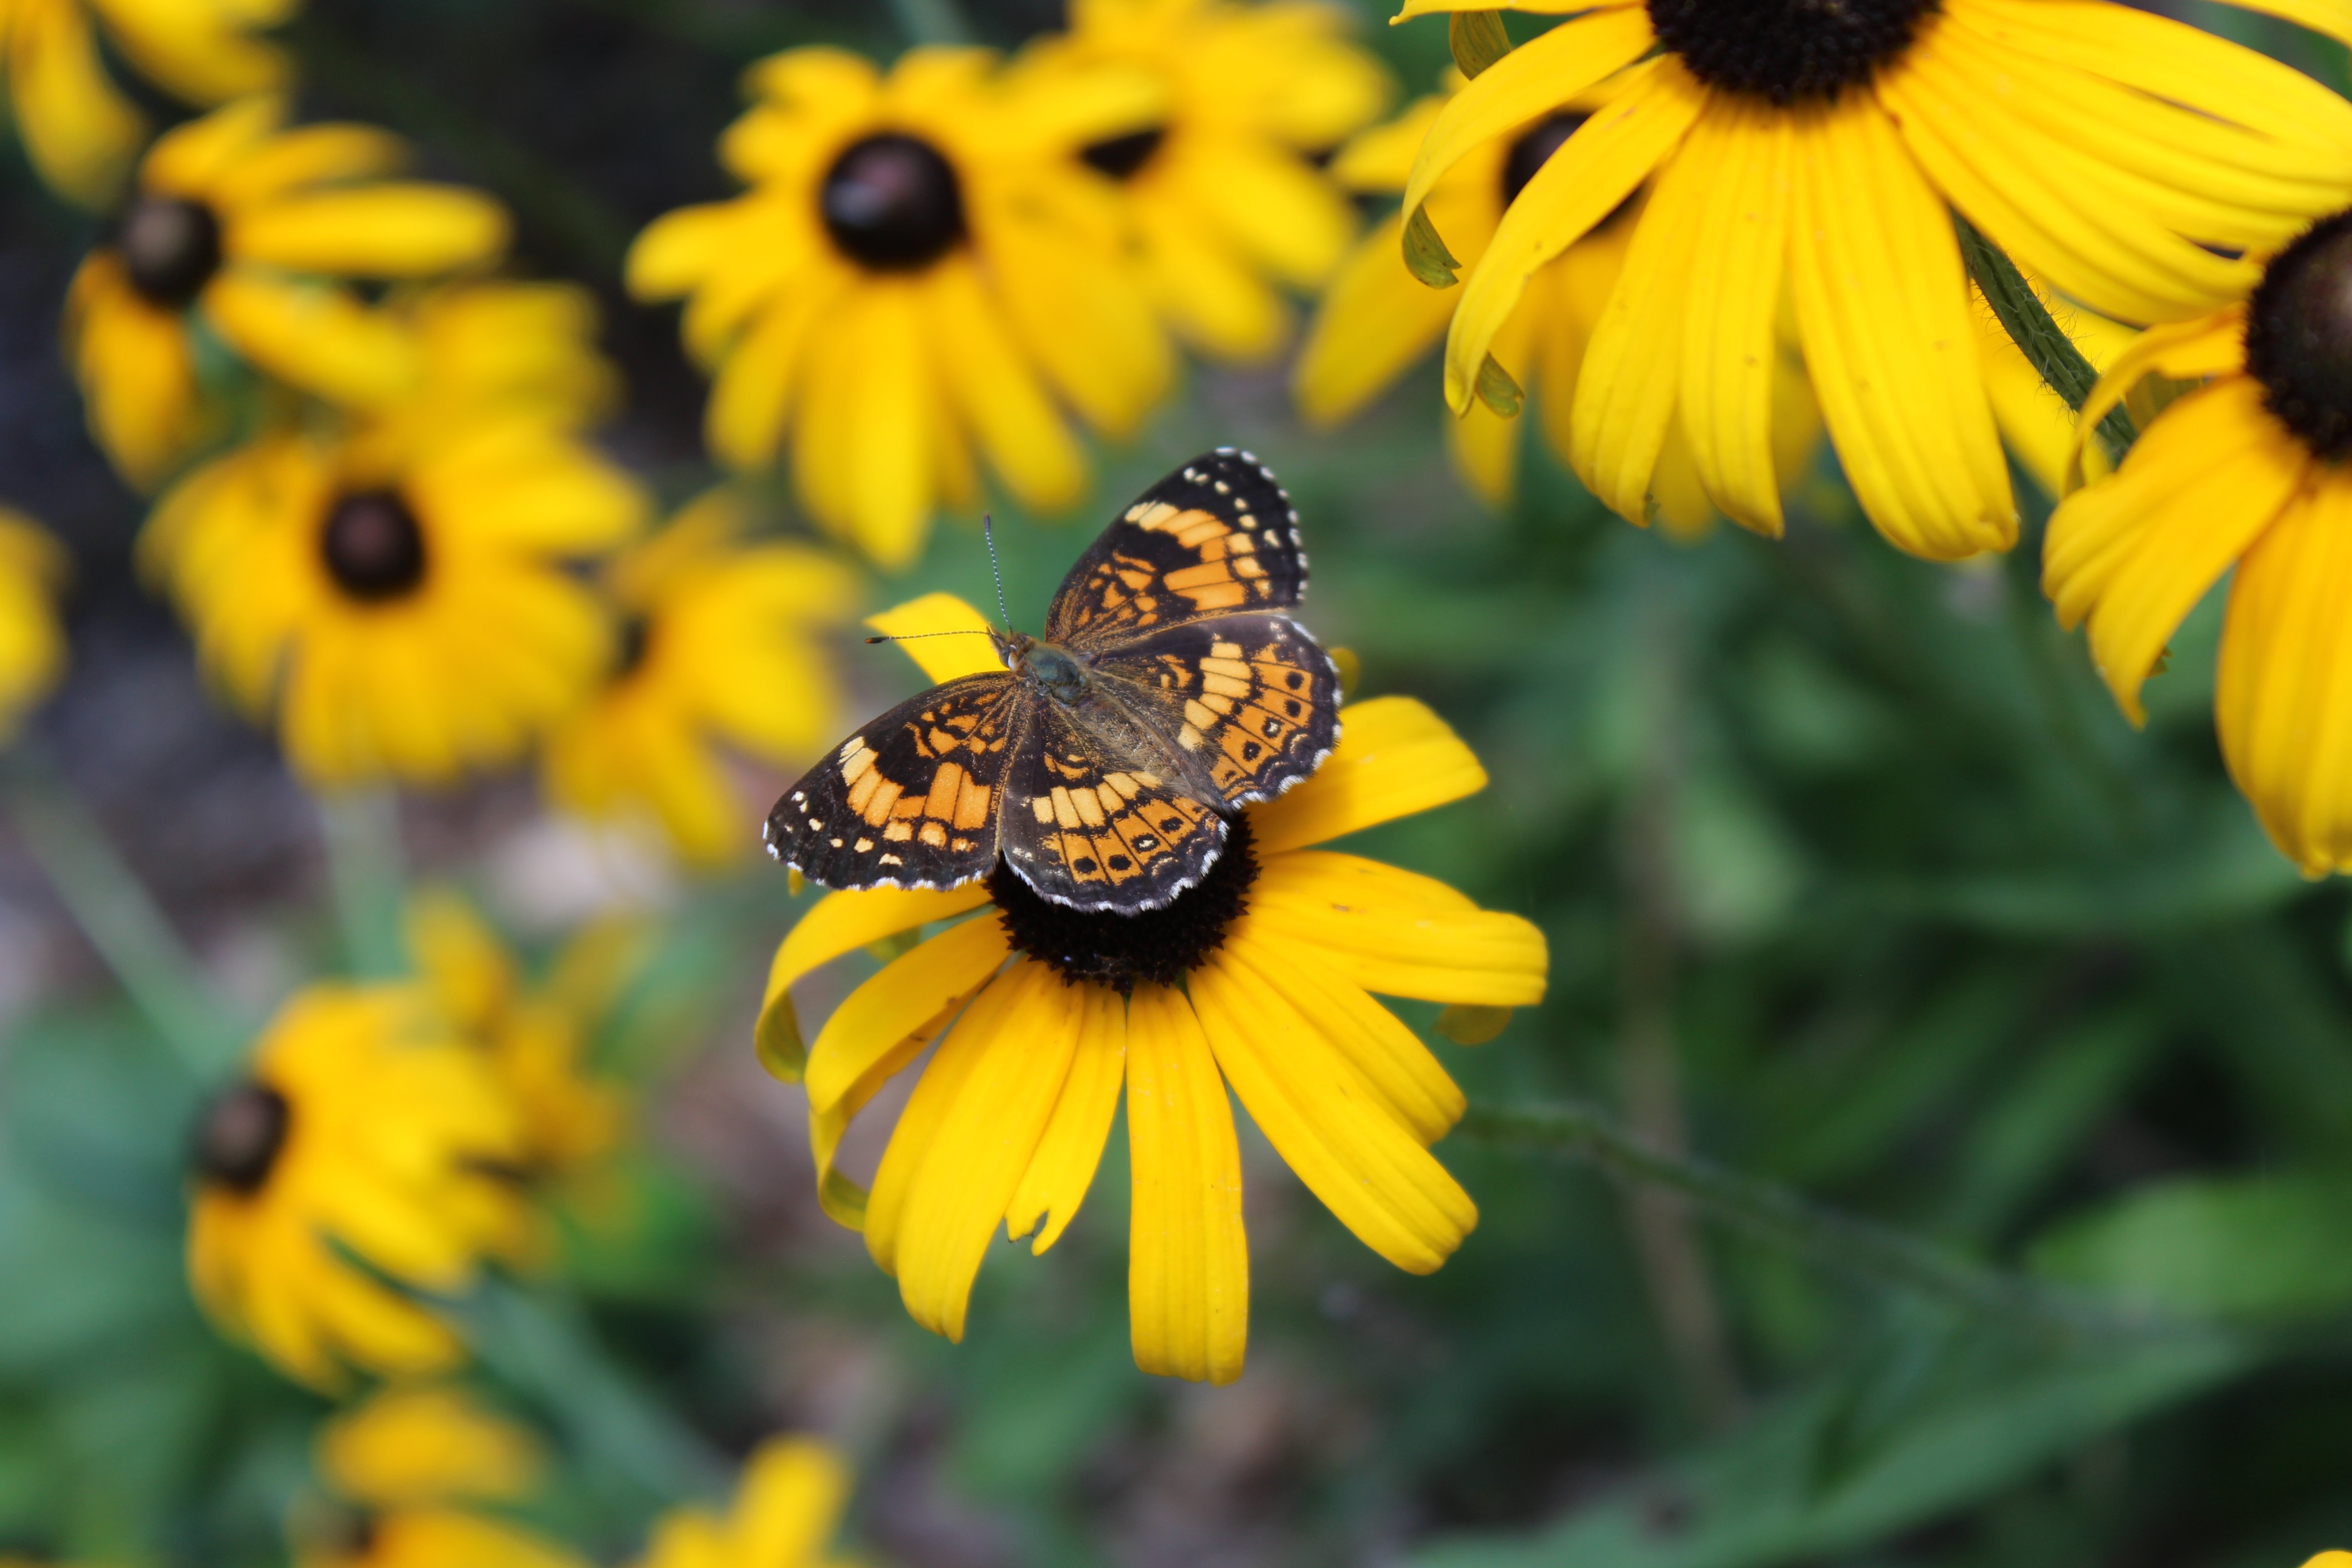 Rudbeckia hirta (black-eyed Susan native plant) with pearl crescent butterfly